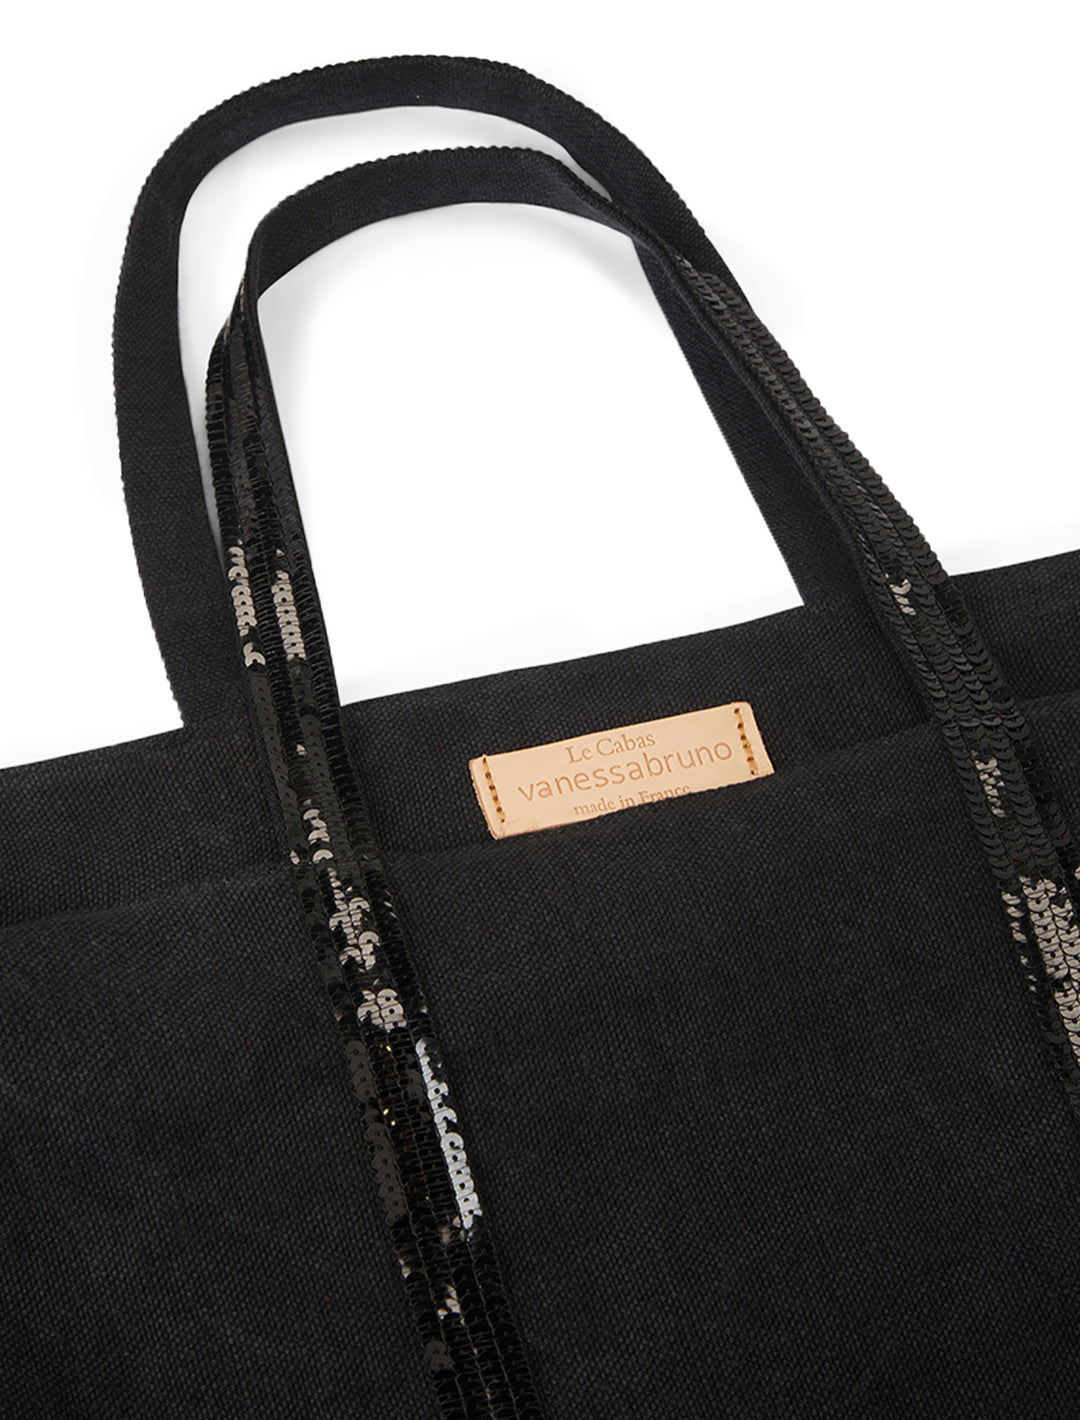 Close-up view of Vanessa Bruno's cabas l tote in noir.